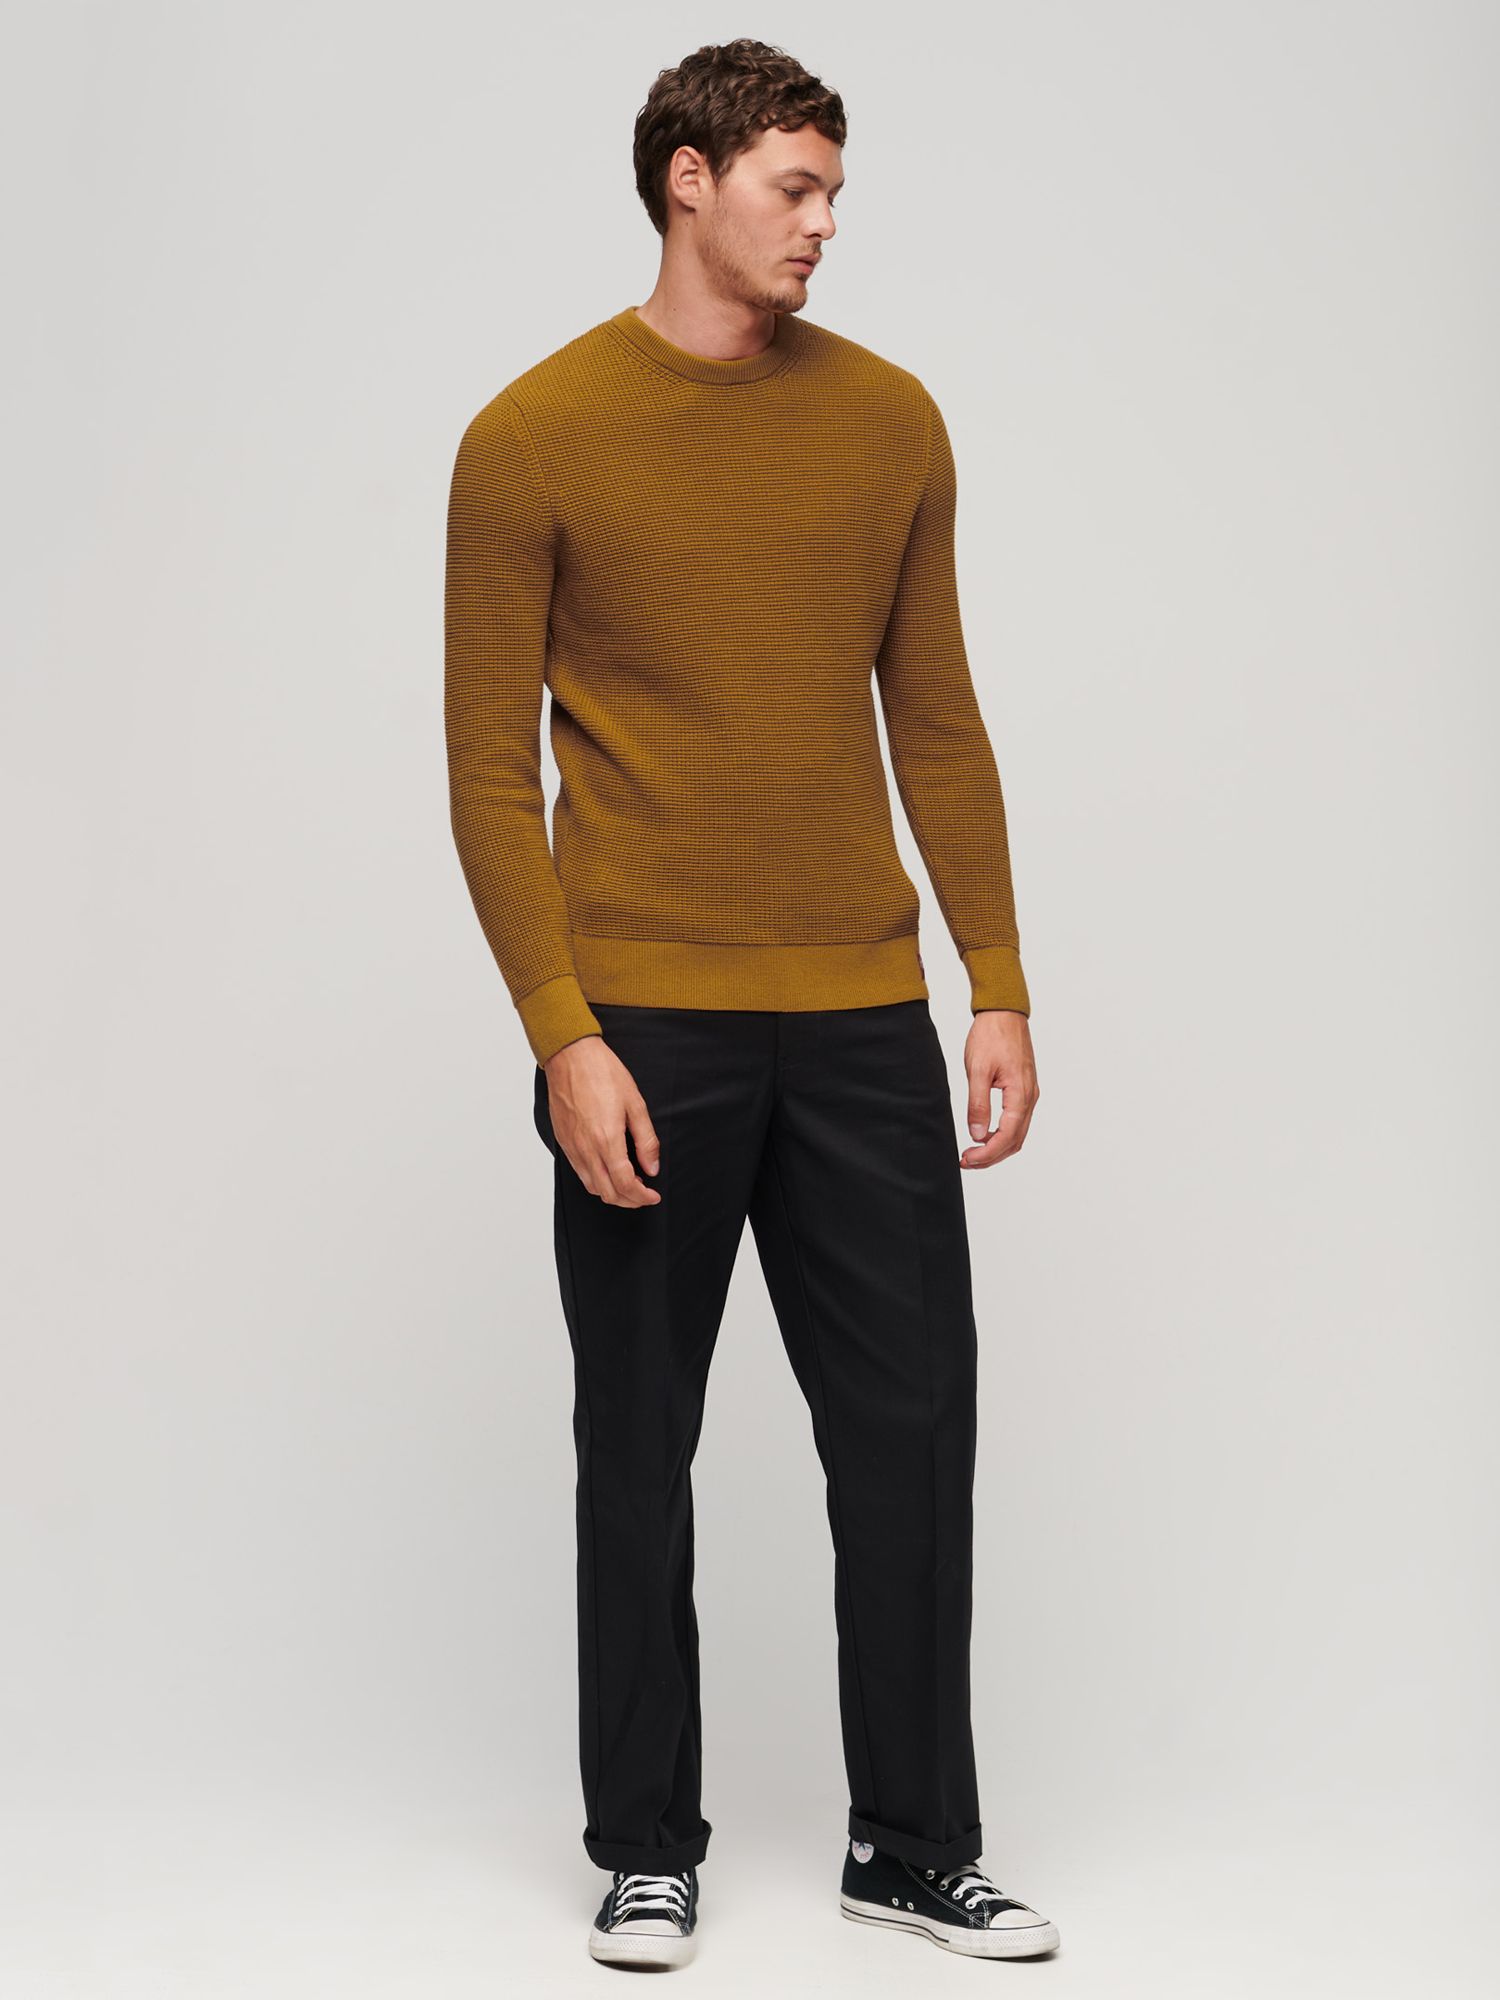 Superdry Textured Crew Knit Jumper, Yellow at John Lewis & Partners